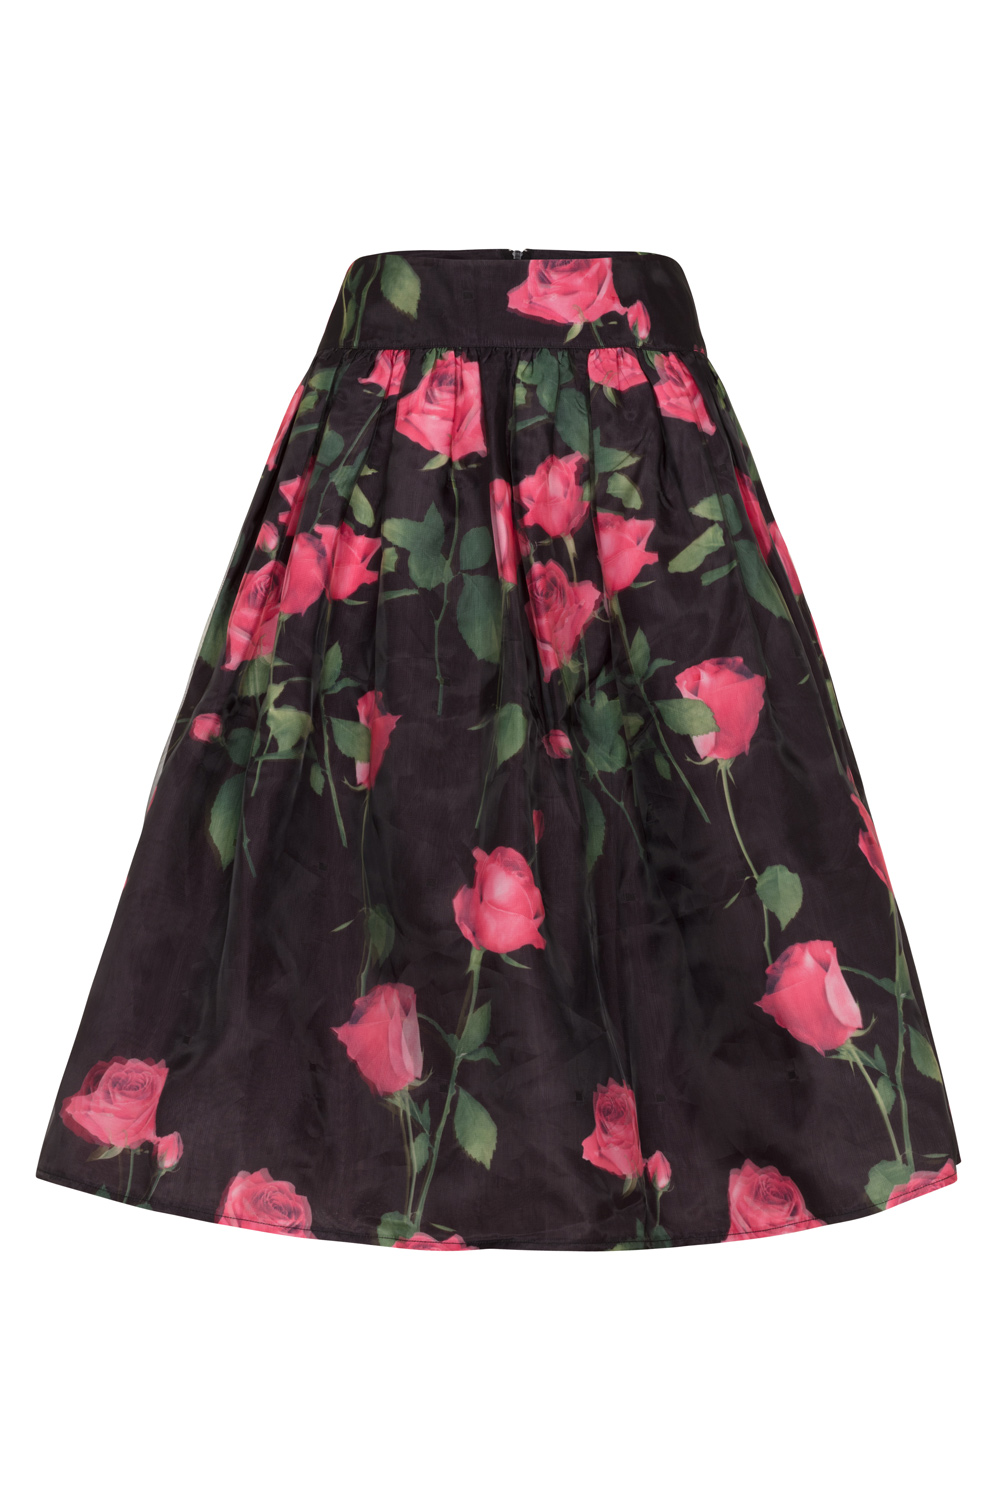 Nellie Rose Skirt with Overlay | Vintage Inspired Fashion & Accessories ...